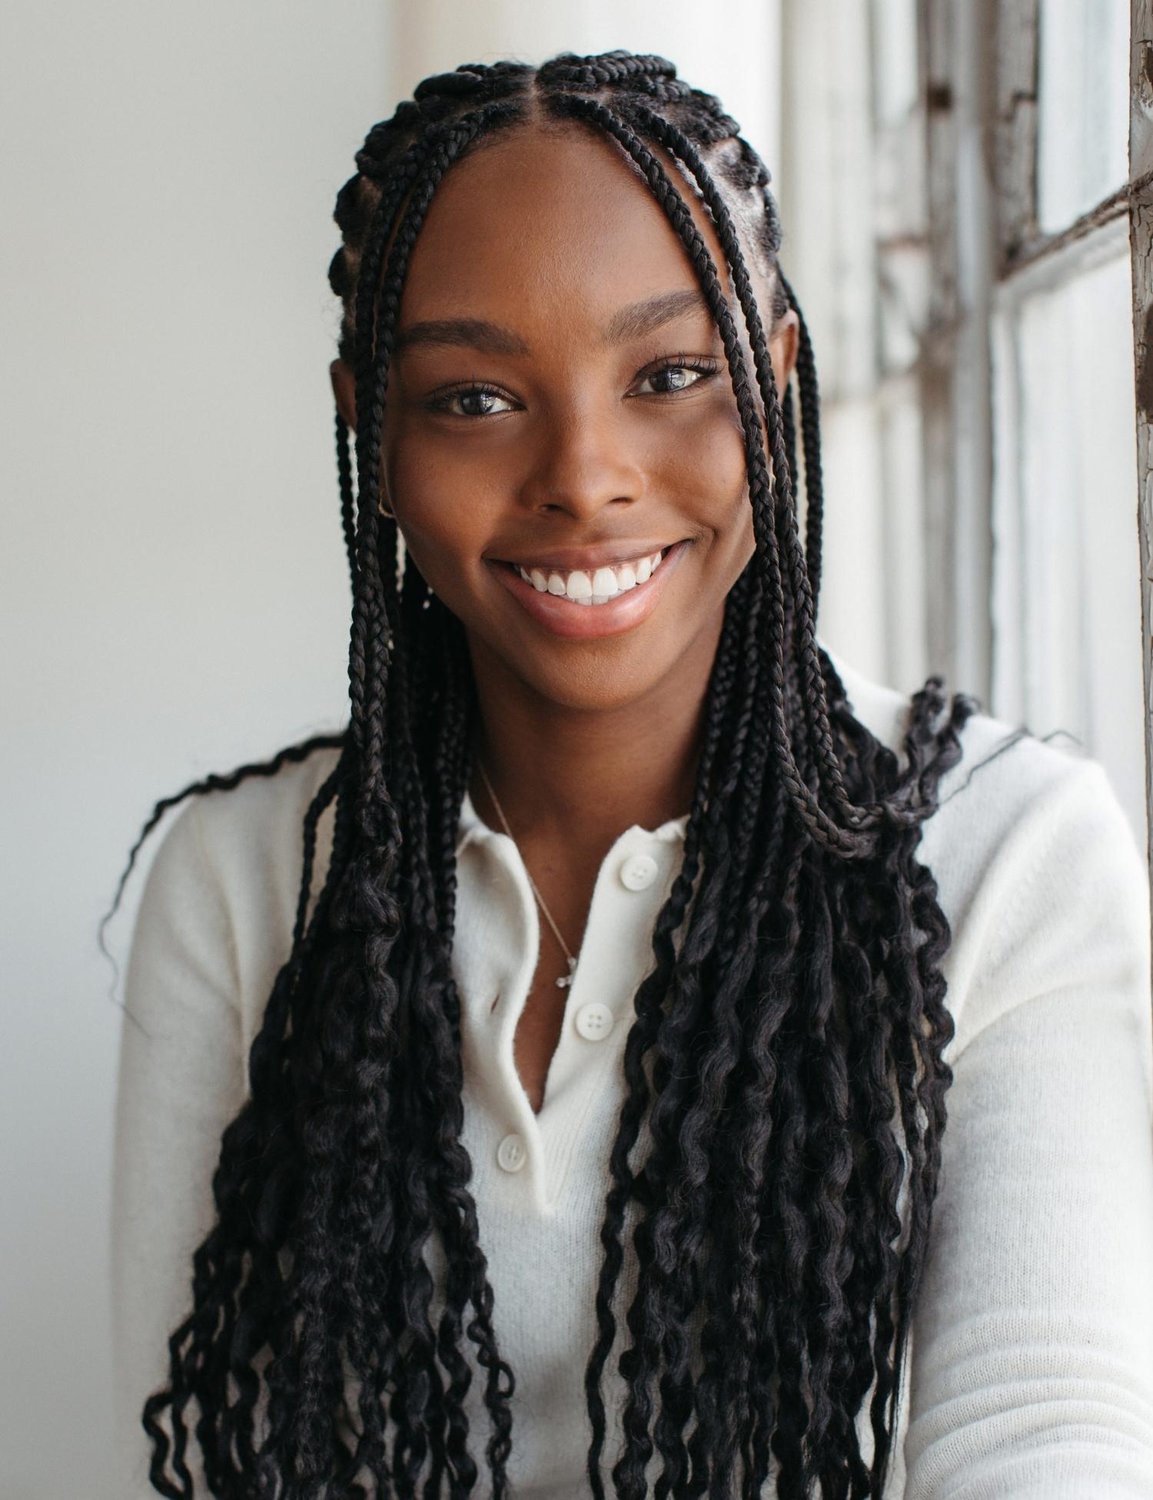 Headshot of Kyla Bolden in a cream button-up sweater, smiling at the camera with her long hair half-up.